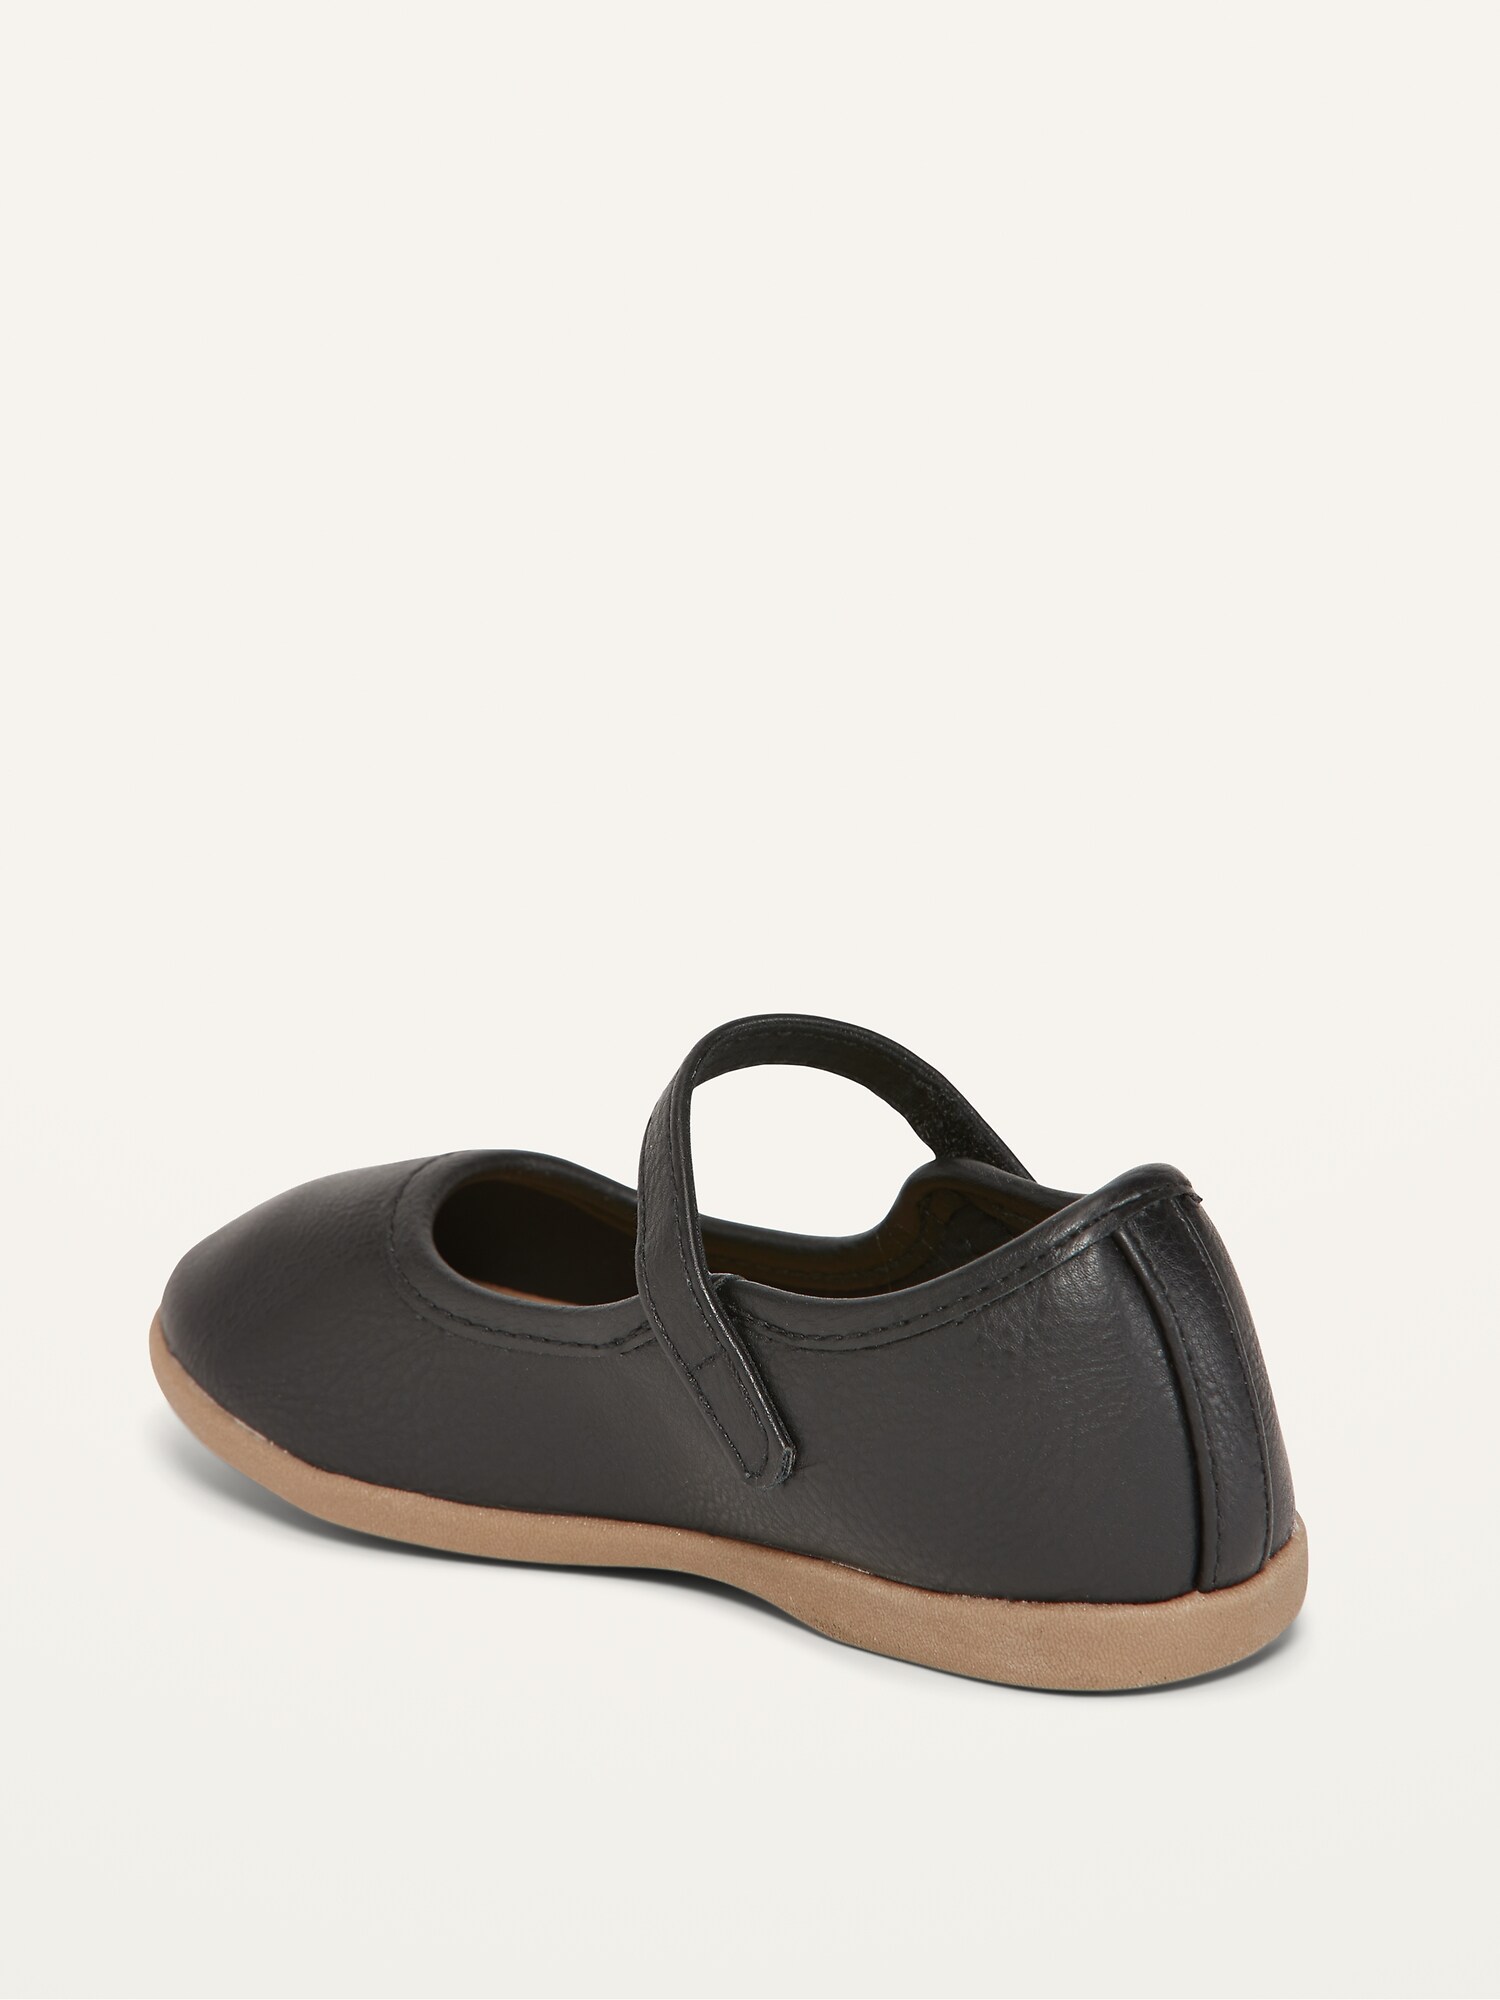 leather mary janes for toddlers